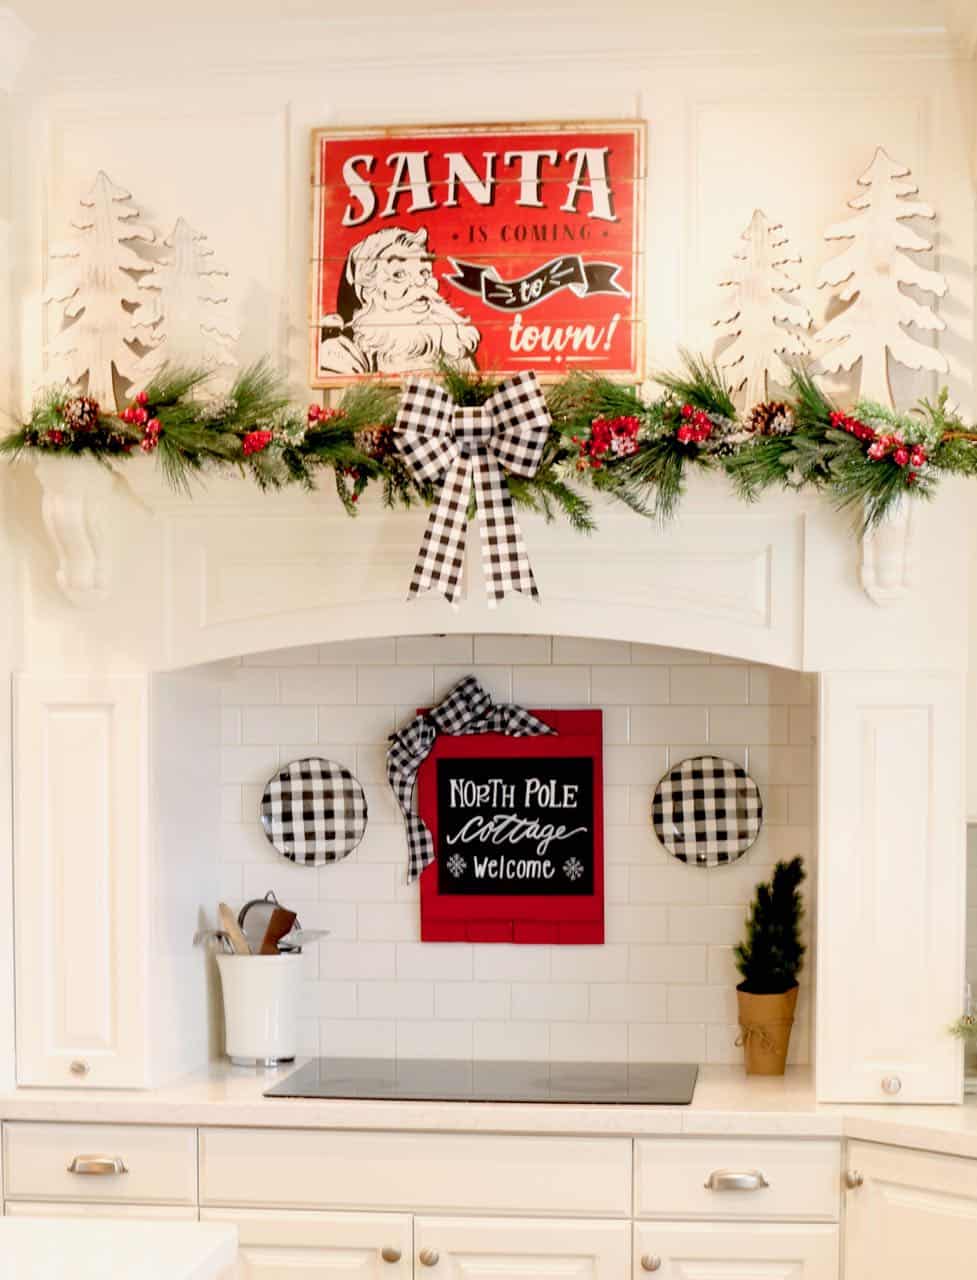 How to hang decor on backsplash tile with no holes. Tips on decorating your kitchen for Christmas!